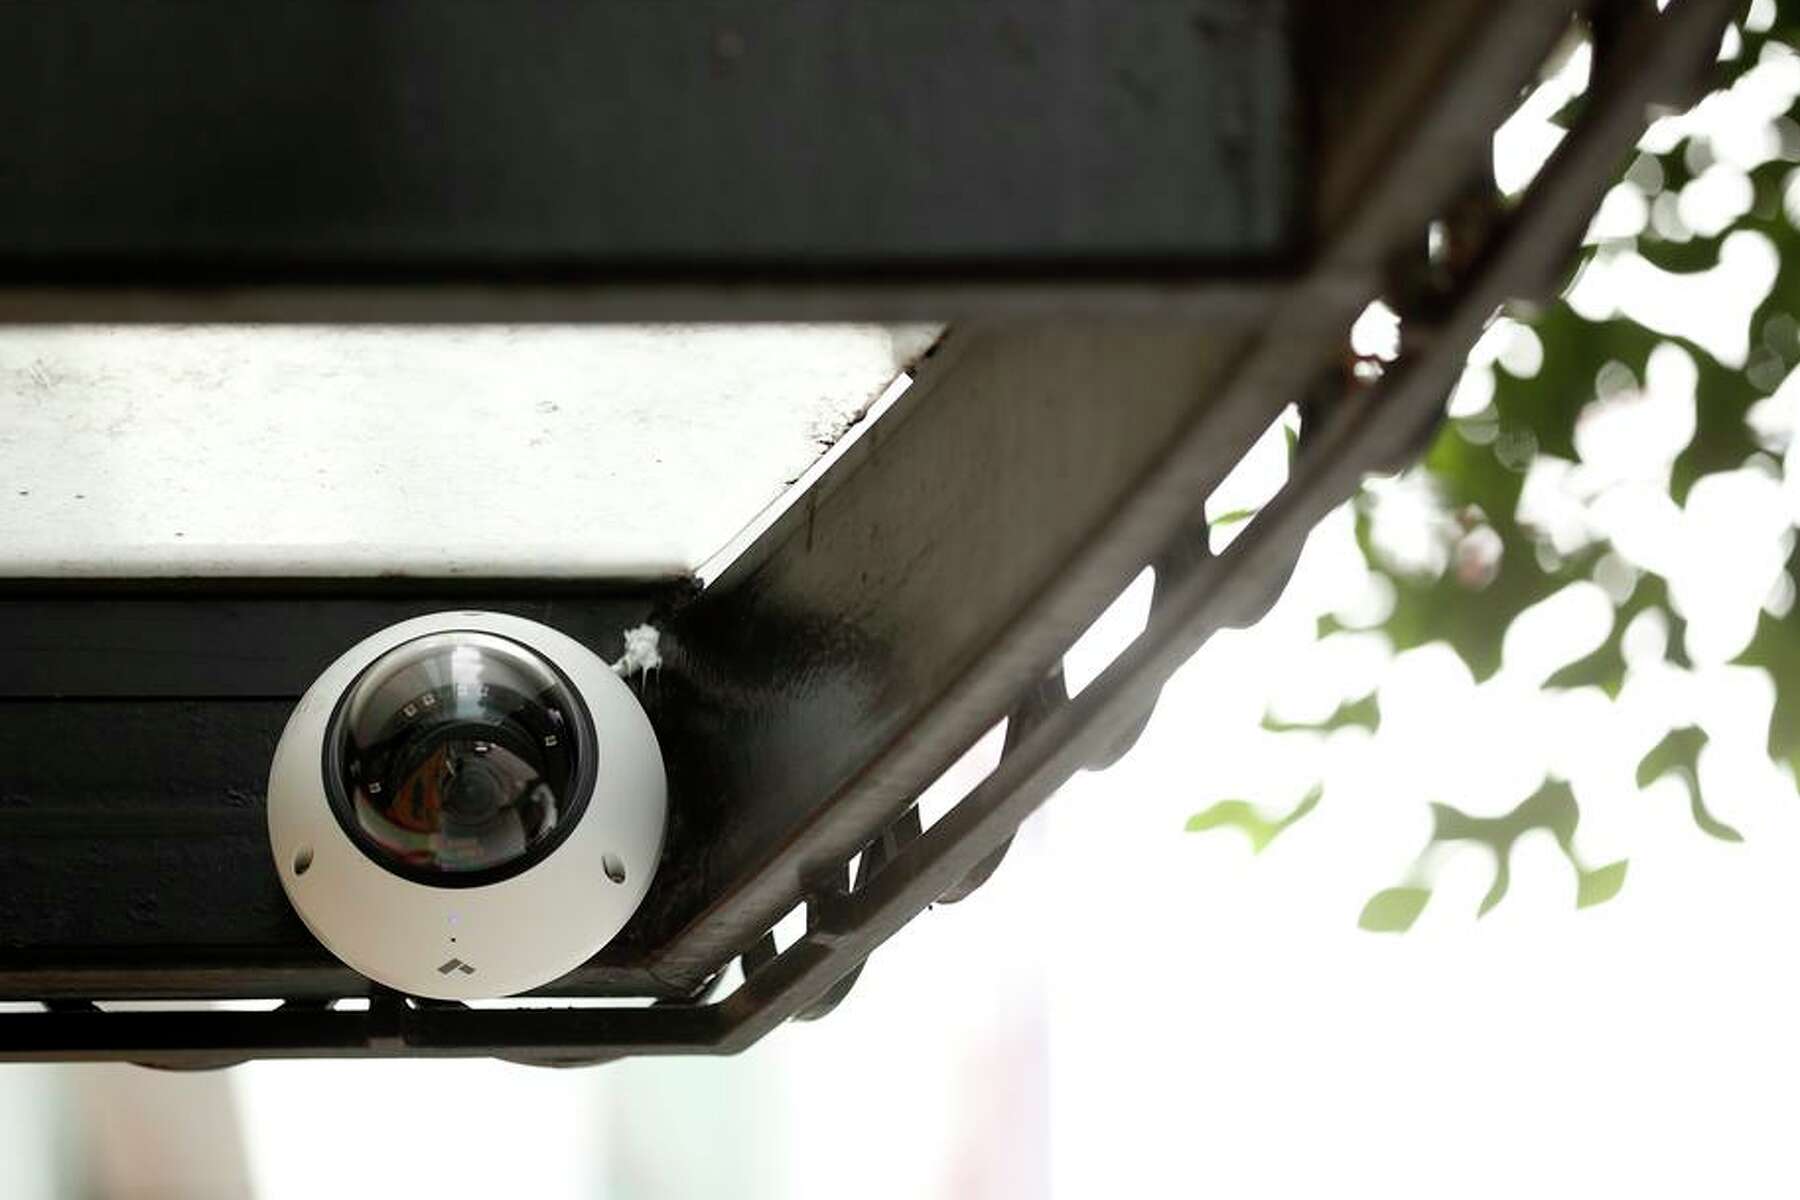 How To Pick A Security Camera For Restaurants